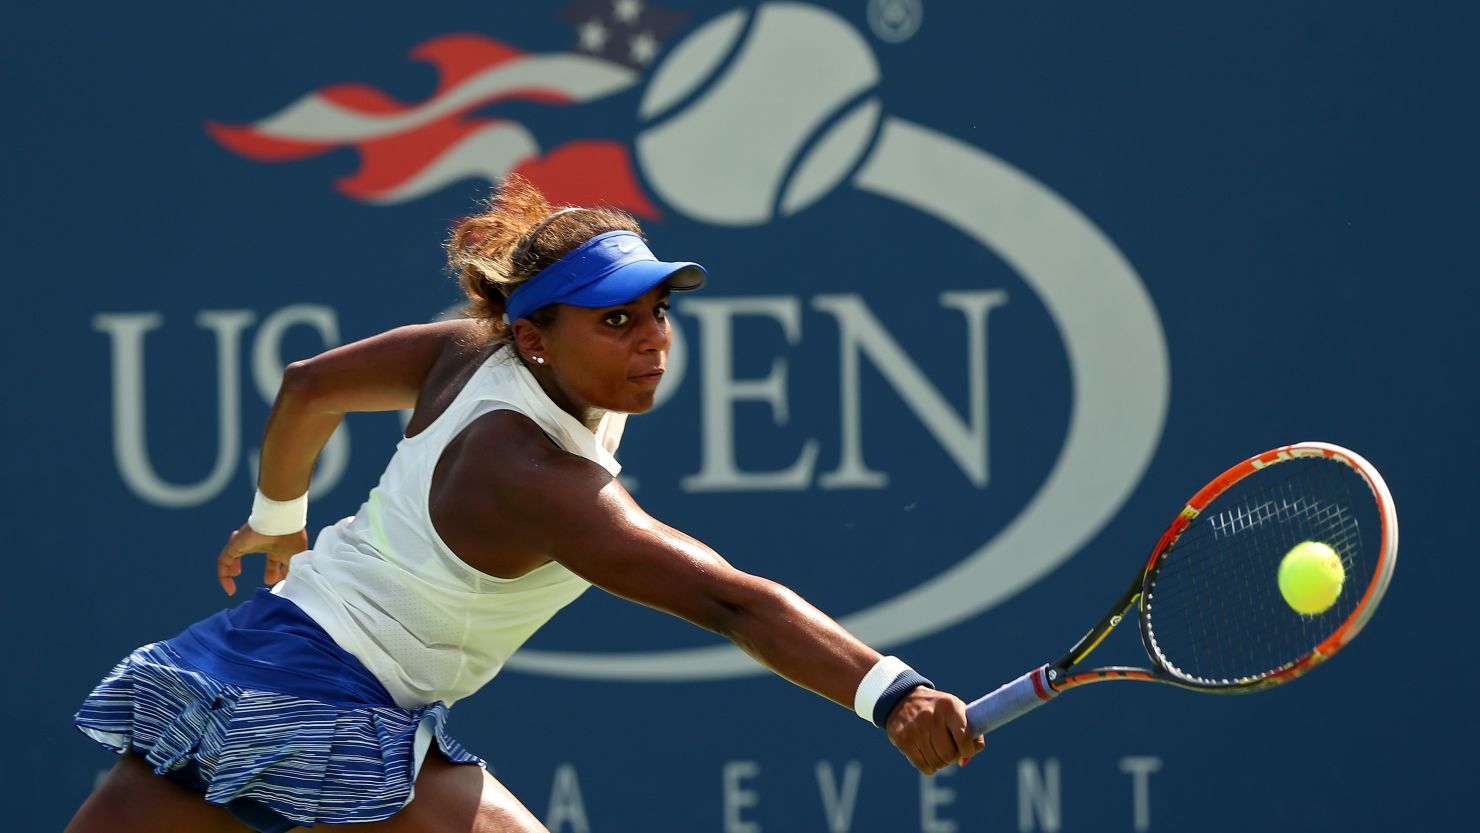 Tornado Alicia Black at the US Open in 2014, when she rose to No. 3 in the world junior rankings. 